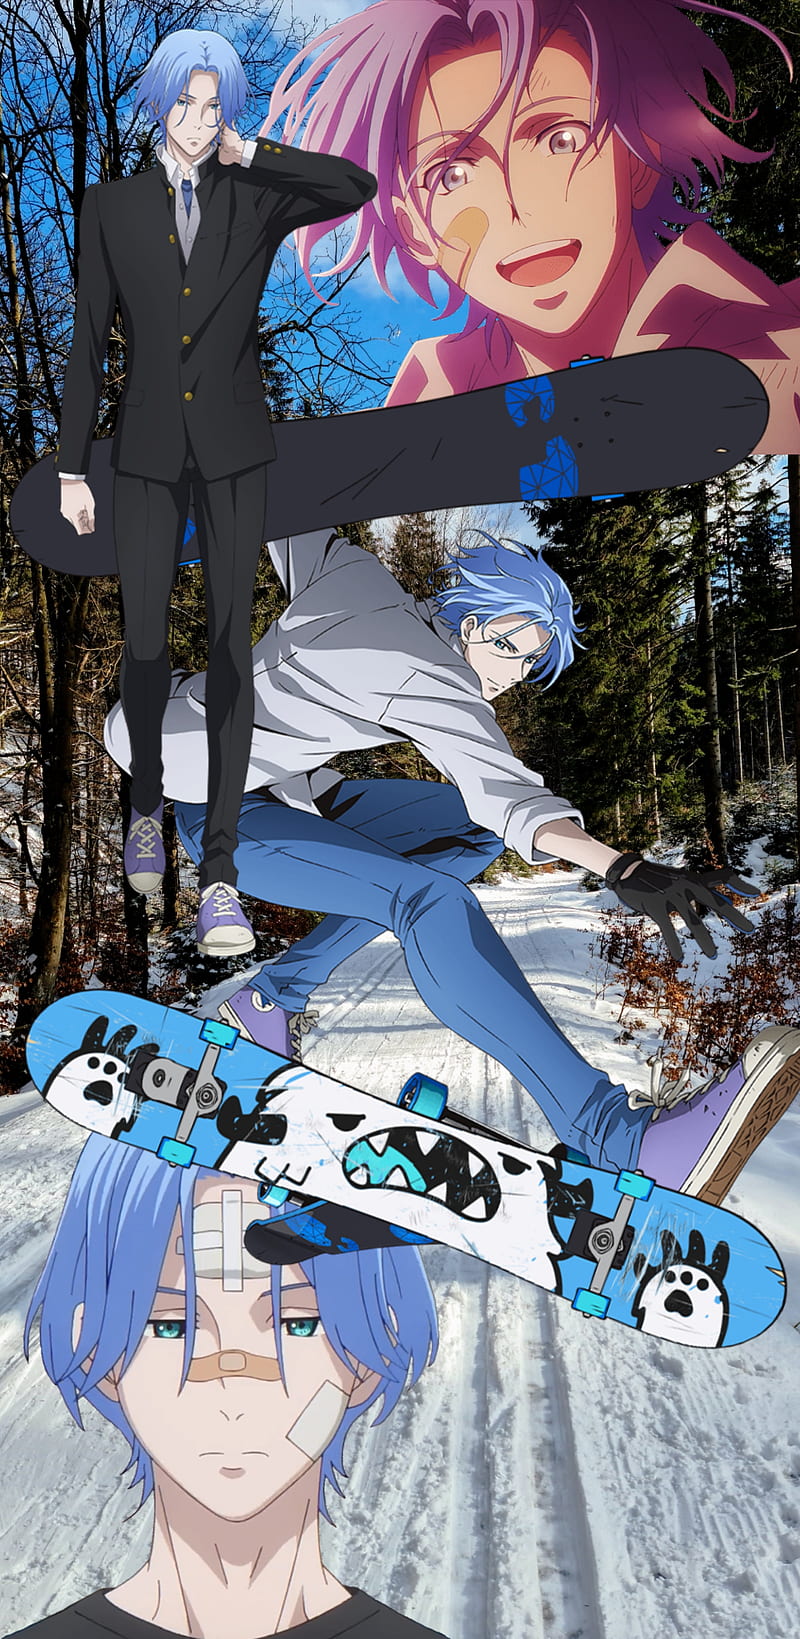 Download Skater Boy with Anime Influence - Mastering the Streets with Style  Wallpaper | Wallpapers.com